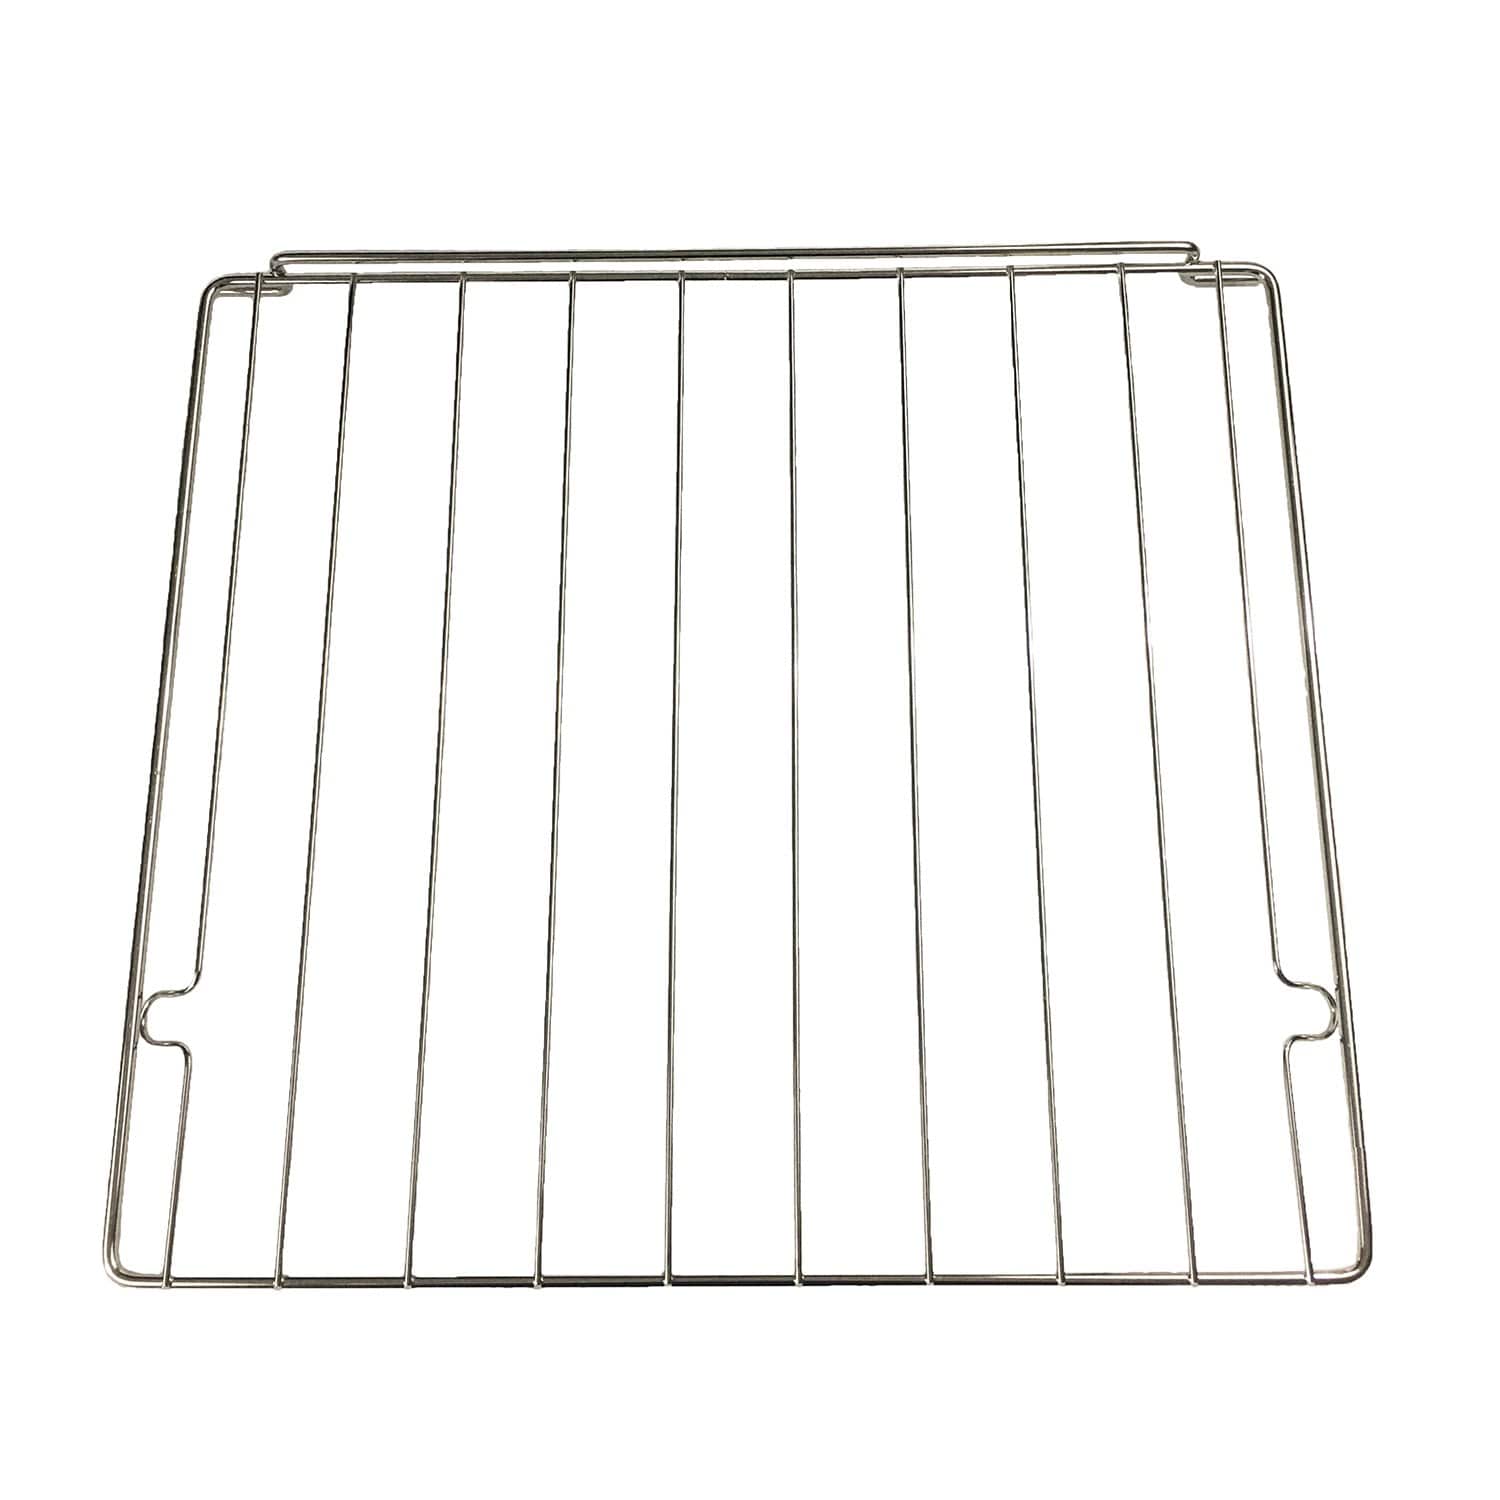 Atwood 51069 Oven Rack Replacement